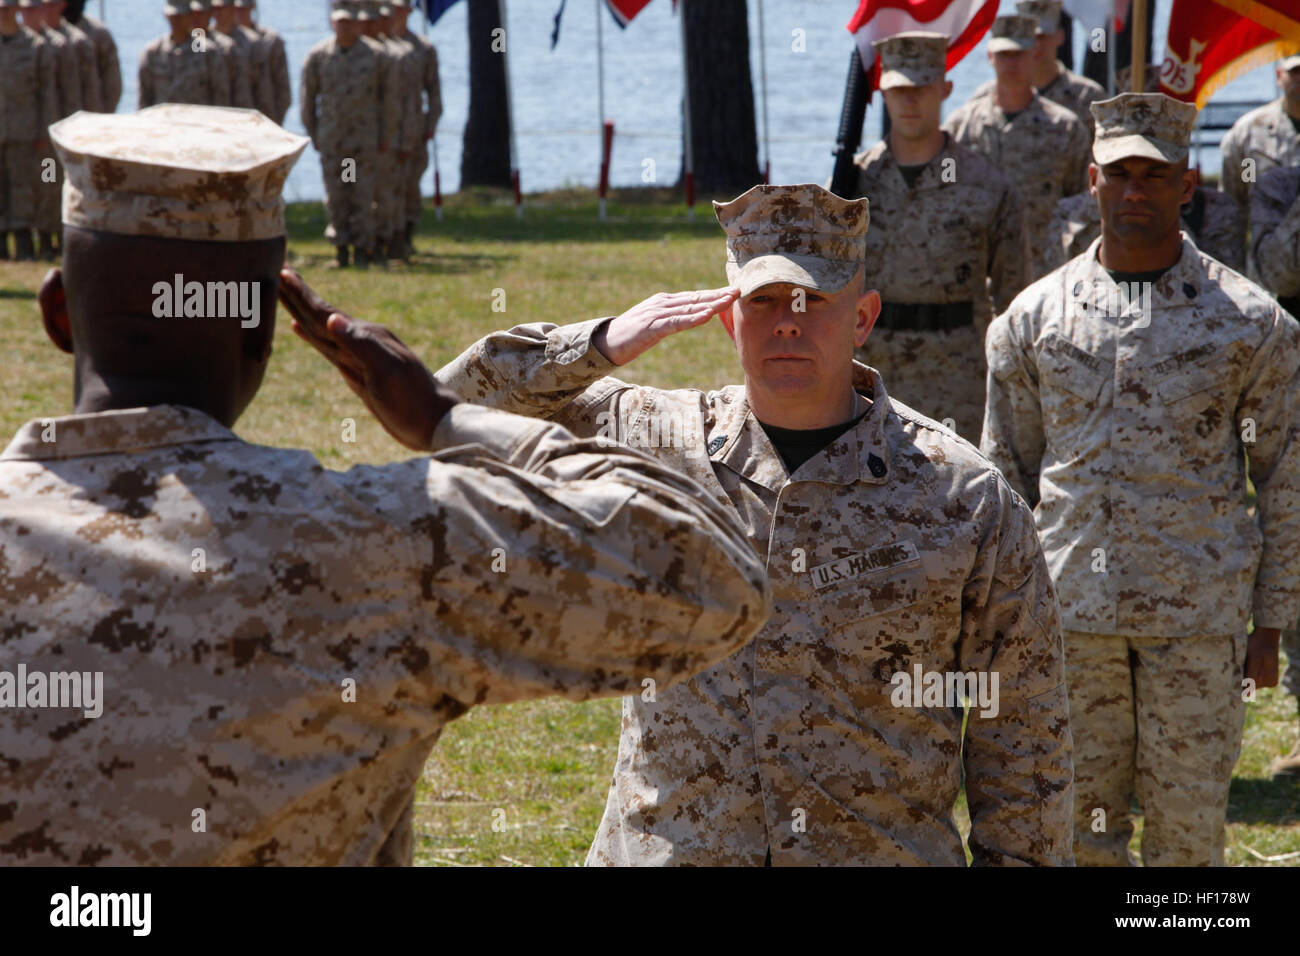 U. S. Marine Gunnery Sergeant Peter Gosnell (right), Instructor, Motor Transportation Maintenance Instructional Company(MTMIC), Logistics Operations School (LOS), Marine Corps Combat Service Support Schools (MCCSSS), renders a hand salute as the Commander of Troops to Major Jerry Godfrey (Left), Commanding Officer, MTMIC, LOS, MCCSSS, during Gunnery Sergeant Markus Caldwells' retirement ceremony on Camp Johnson N.C., March 28, 2013. Friends, family, and service members gathered to celebrate Gunnery Sergeant Caldwell for his 22 years of faithful service to the United States Marine Corps. (U.S.  Stock Photo